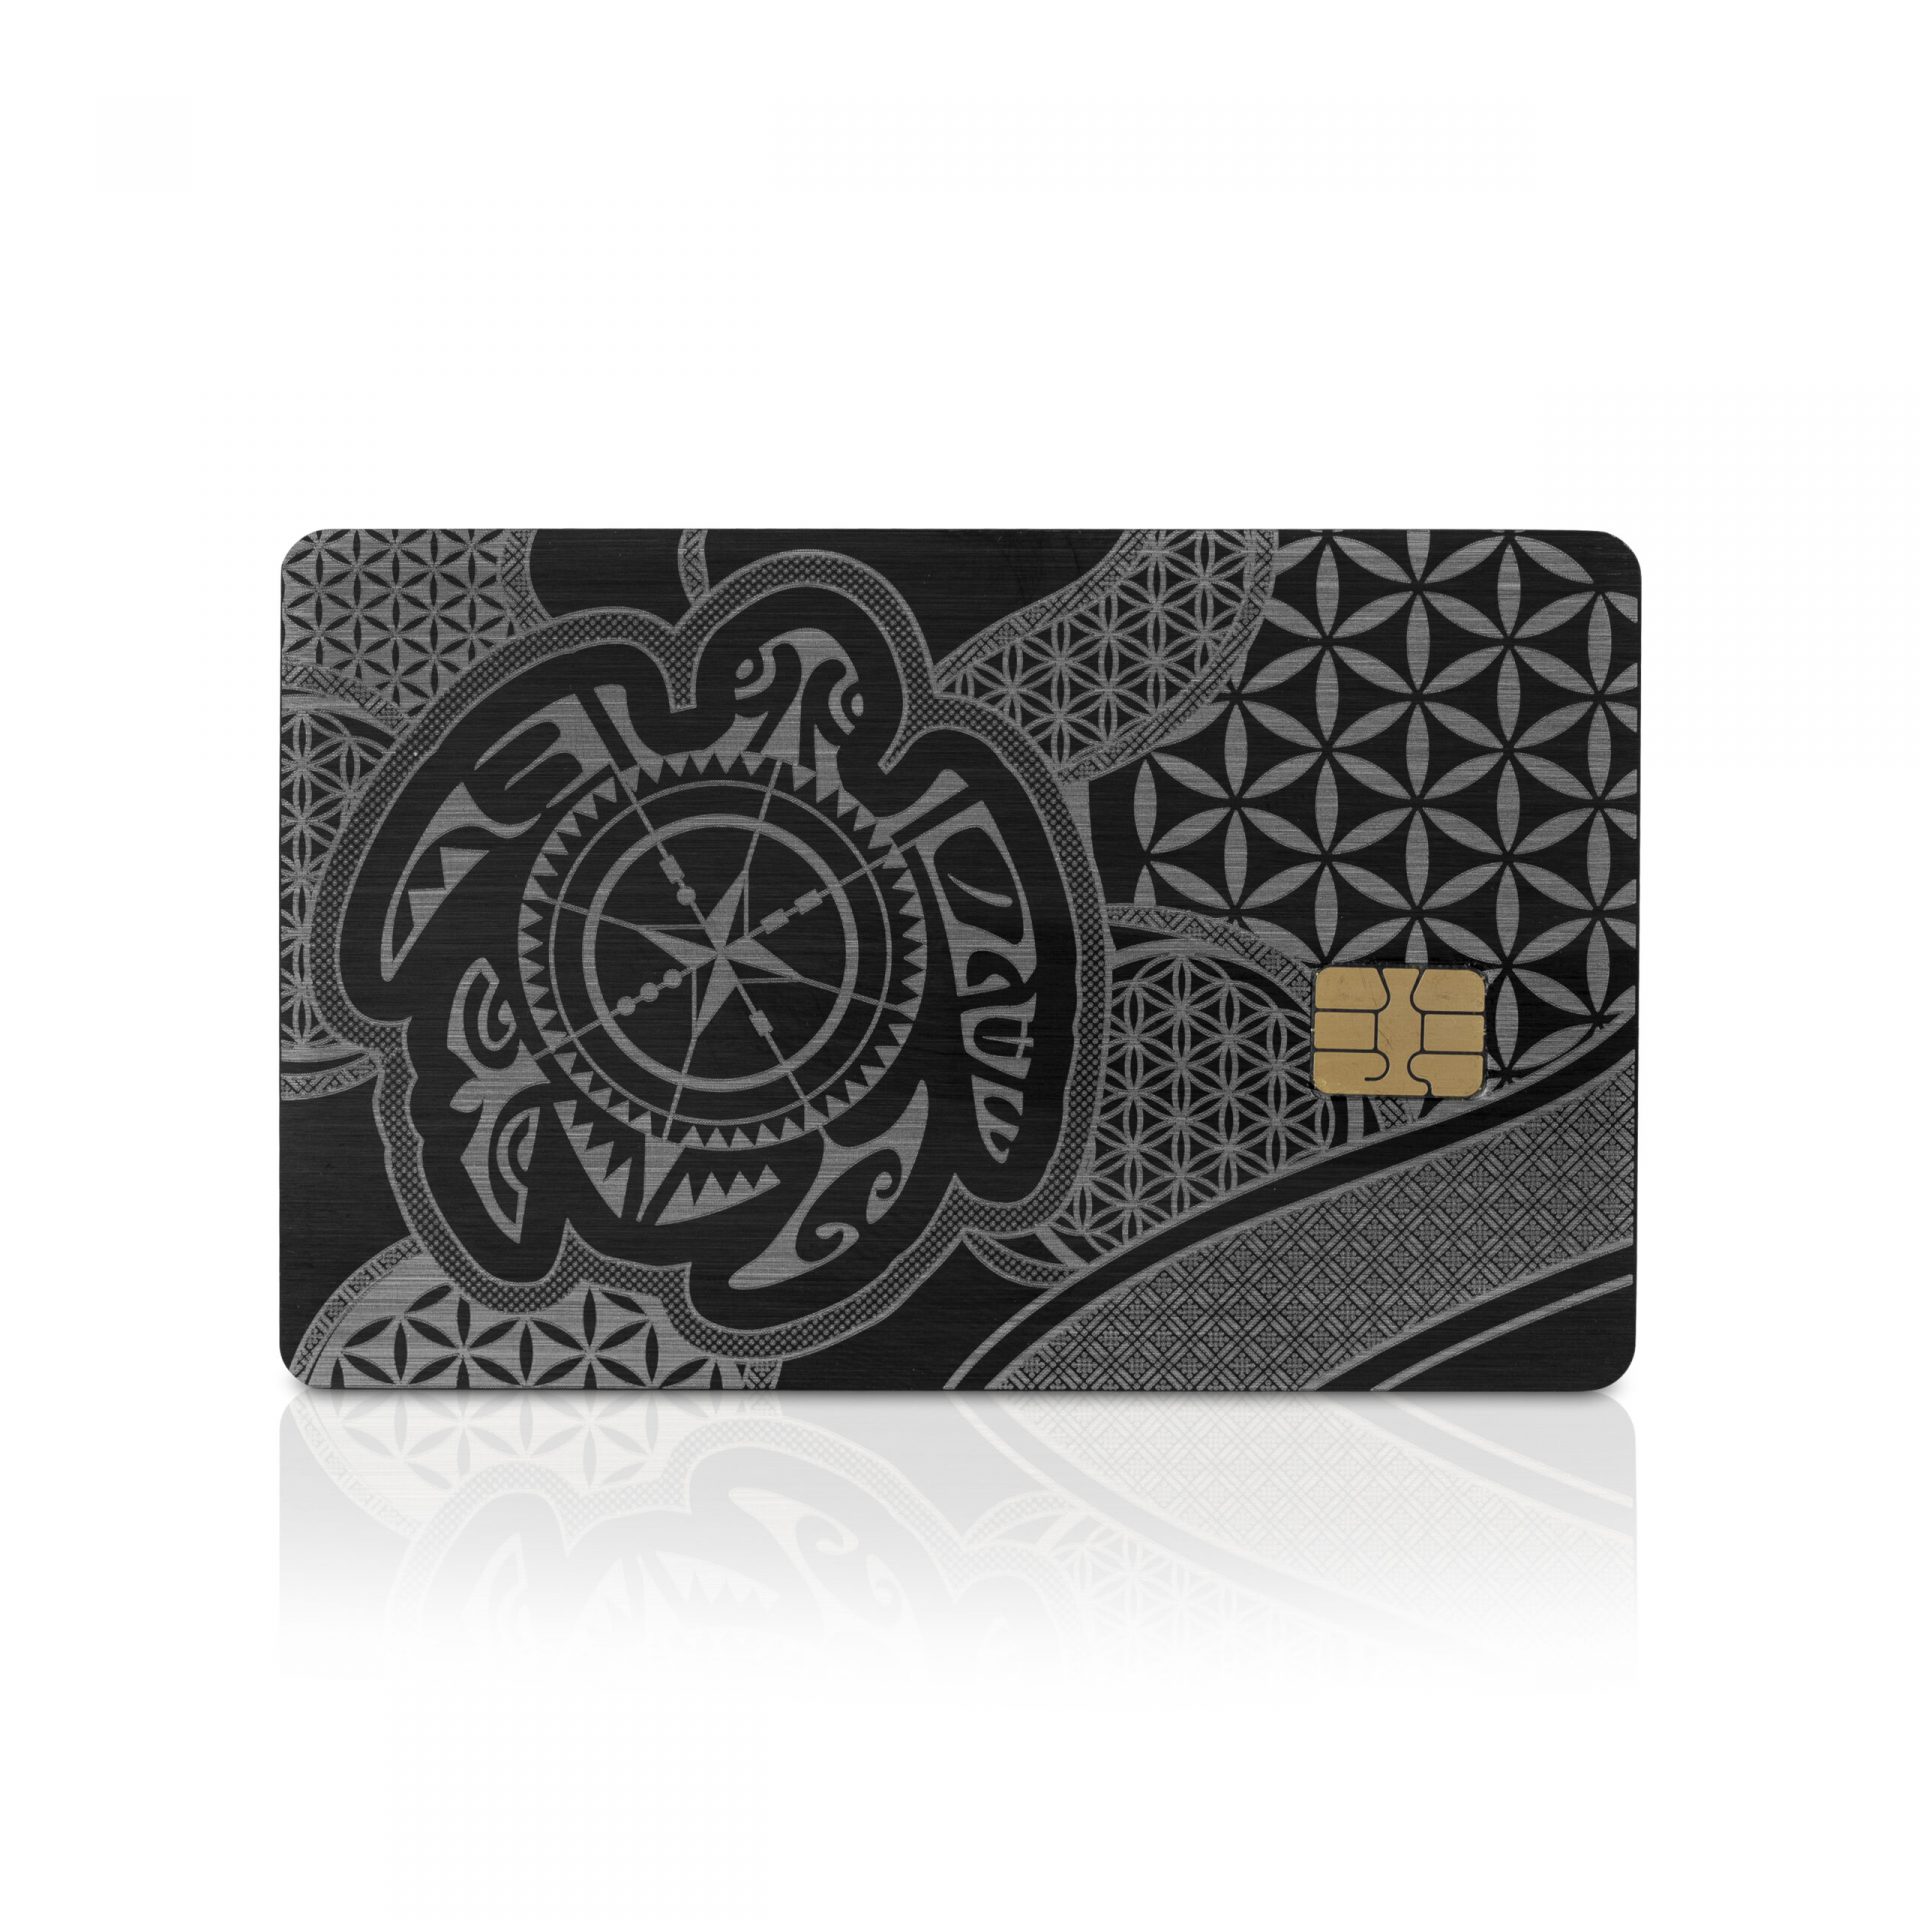 how to get a metal card | custom credit card | personalized credit card